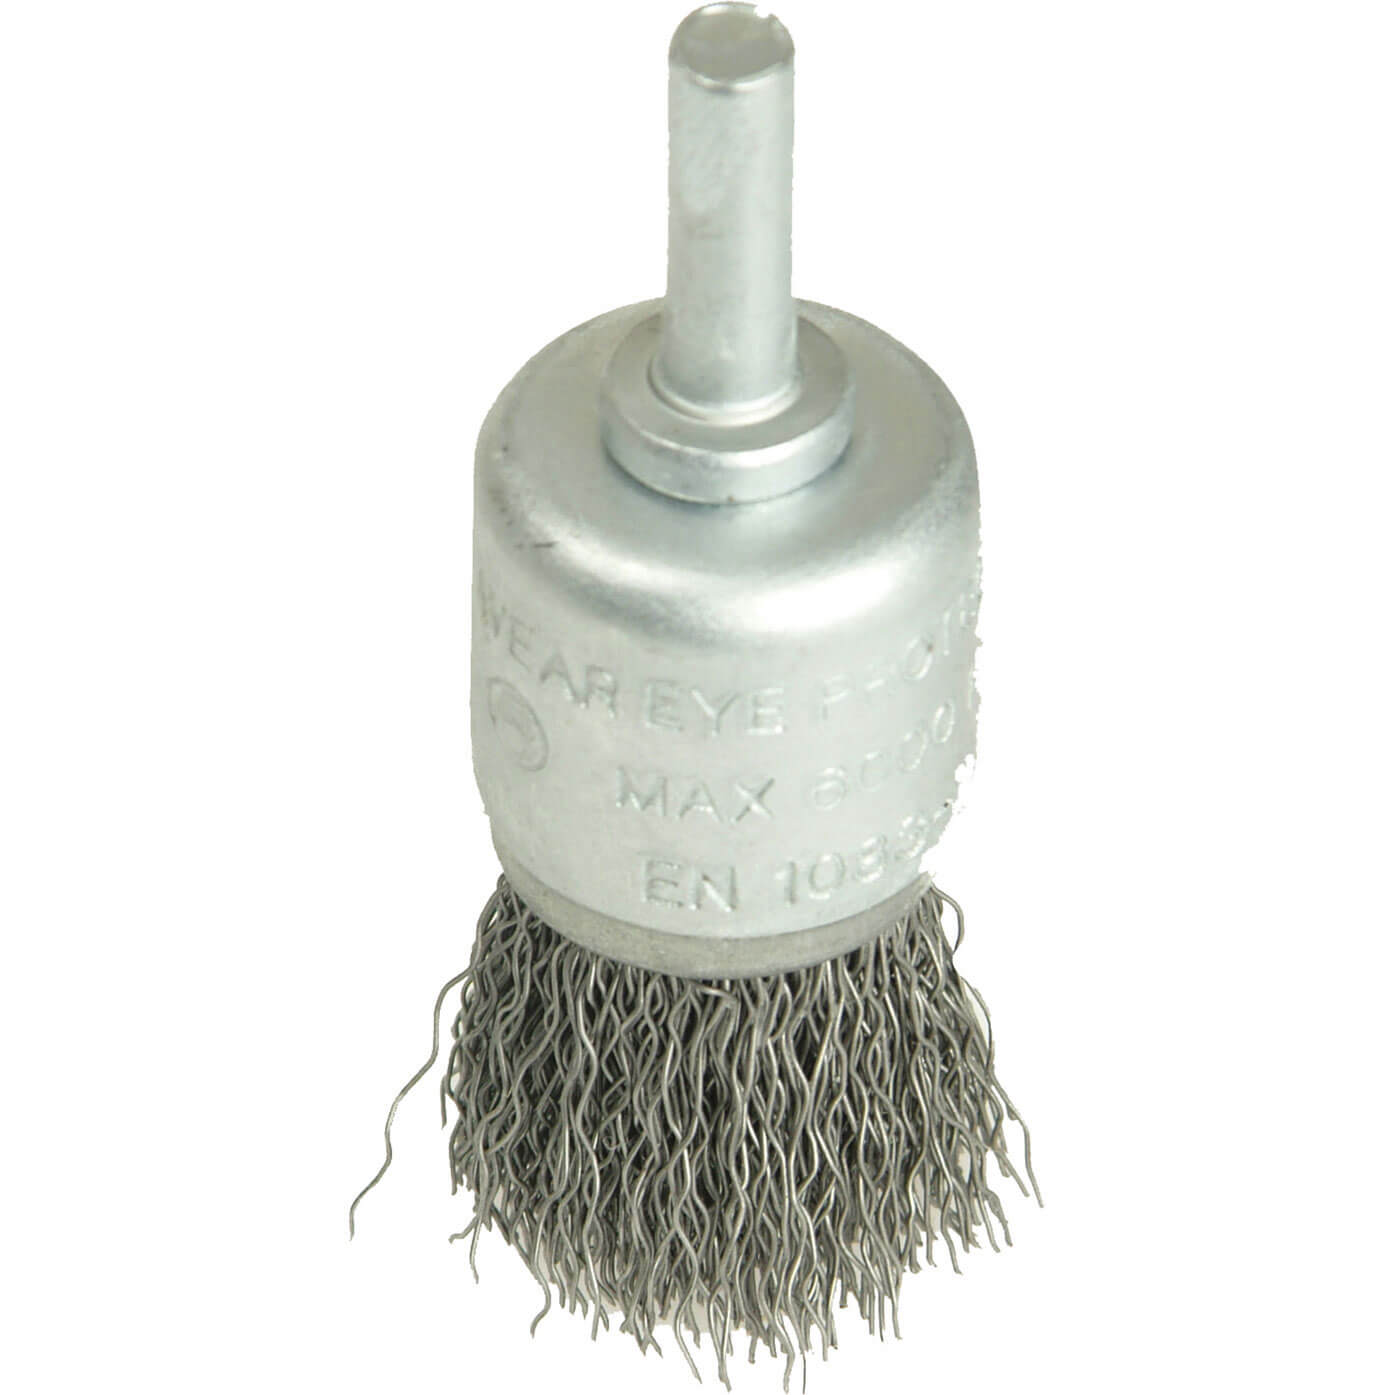 Image of Black and Decker X36025 Piranha Crimped Steel Wire Cup Brush 25mm 6mm Shank